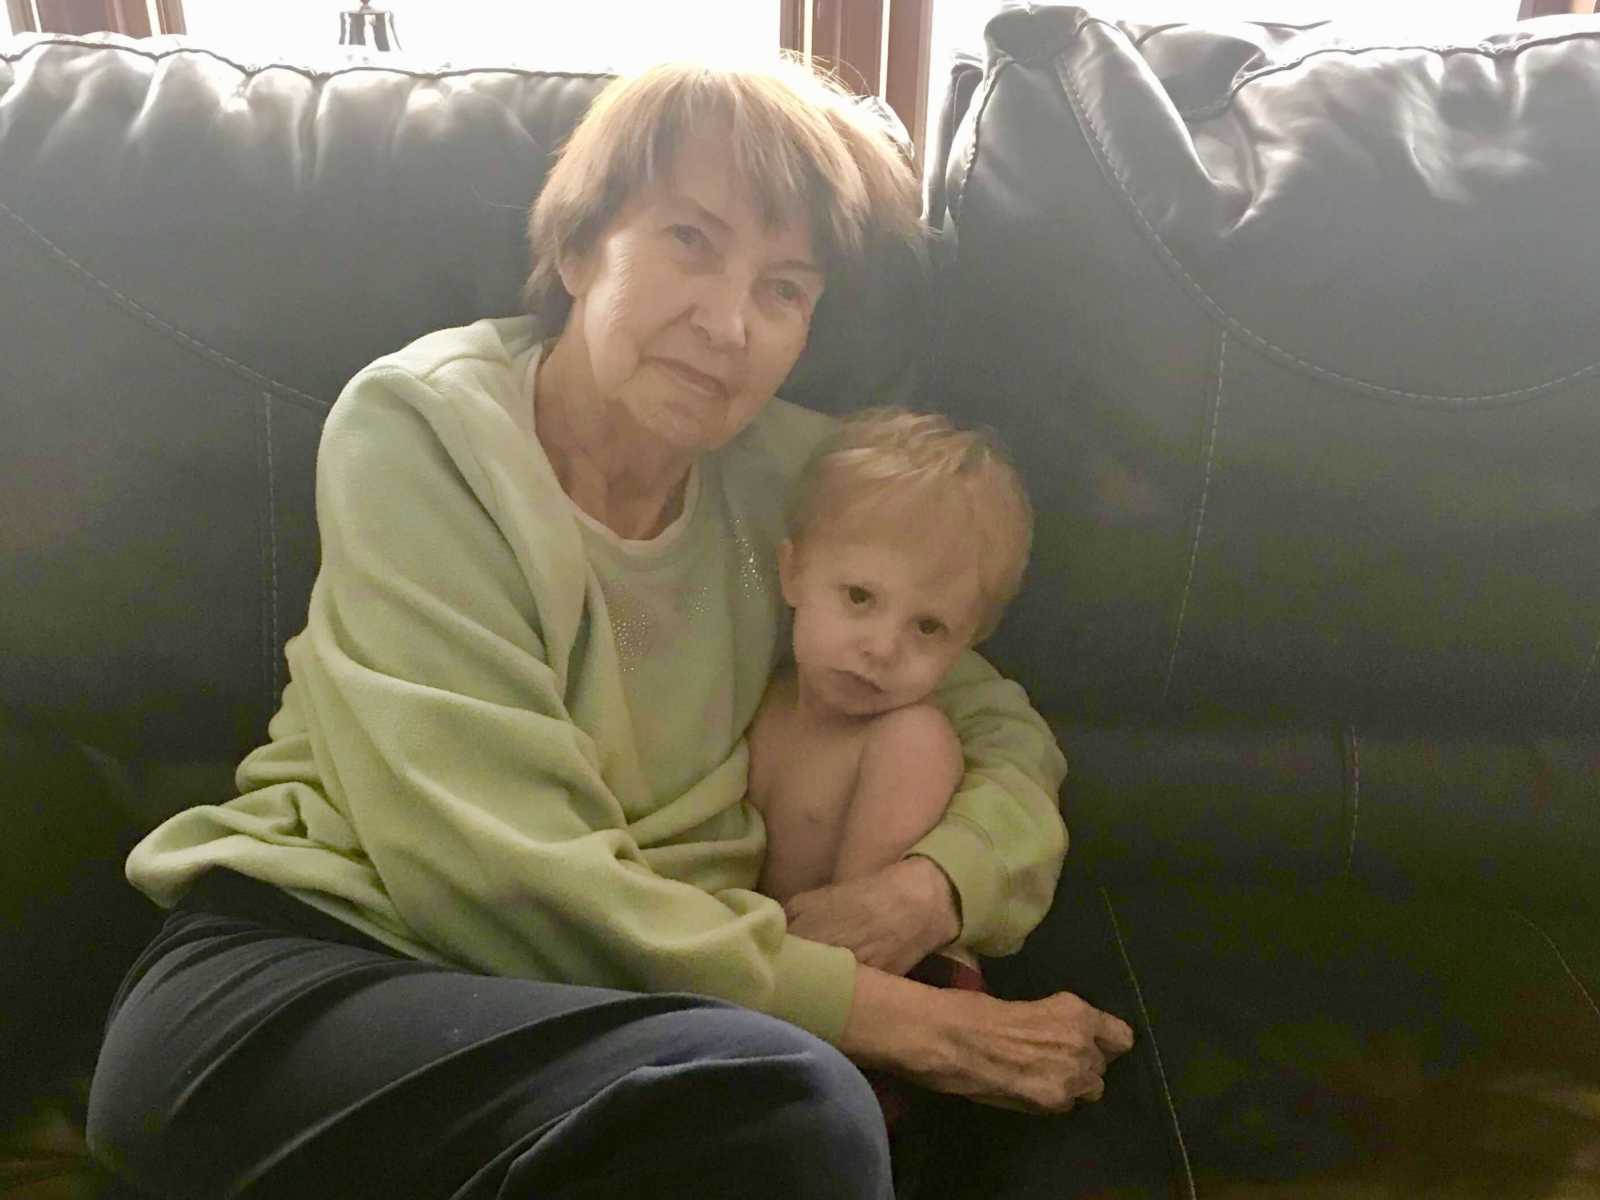 grandmother holds shirtless grandson in her arms as they sit on black leather couch